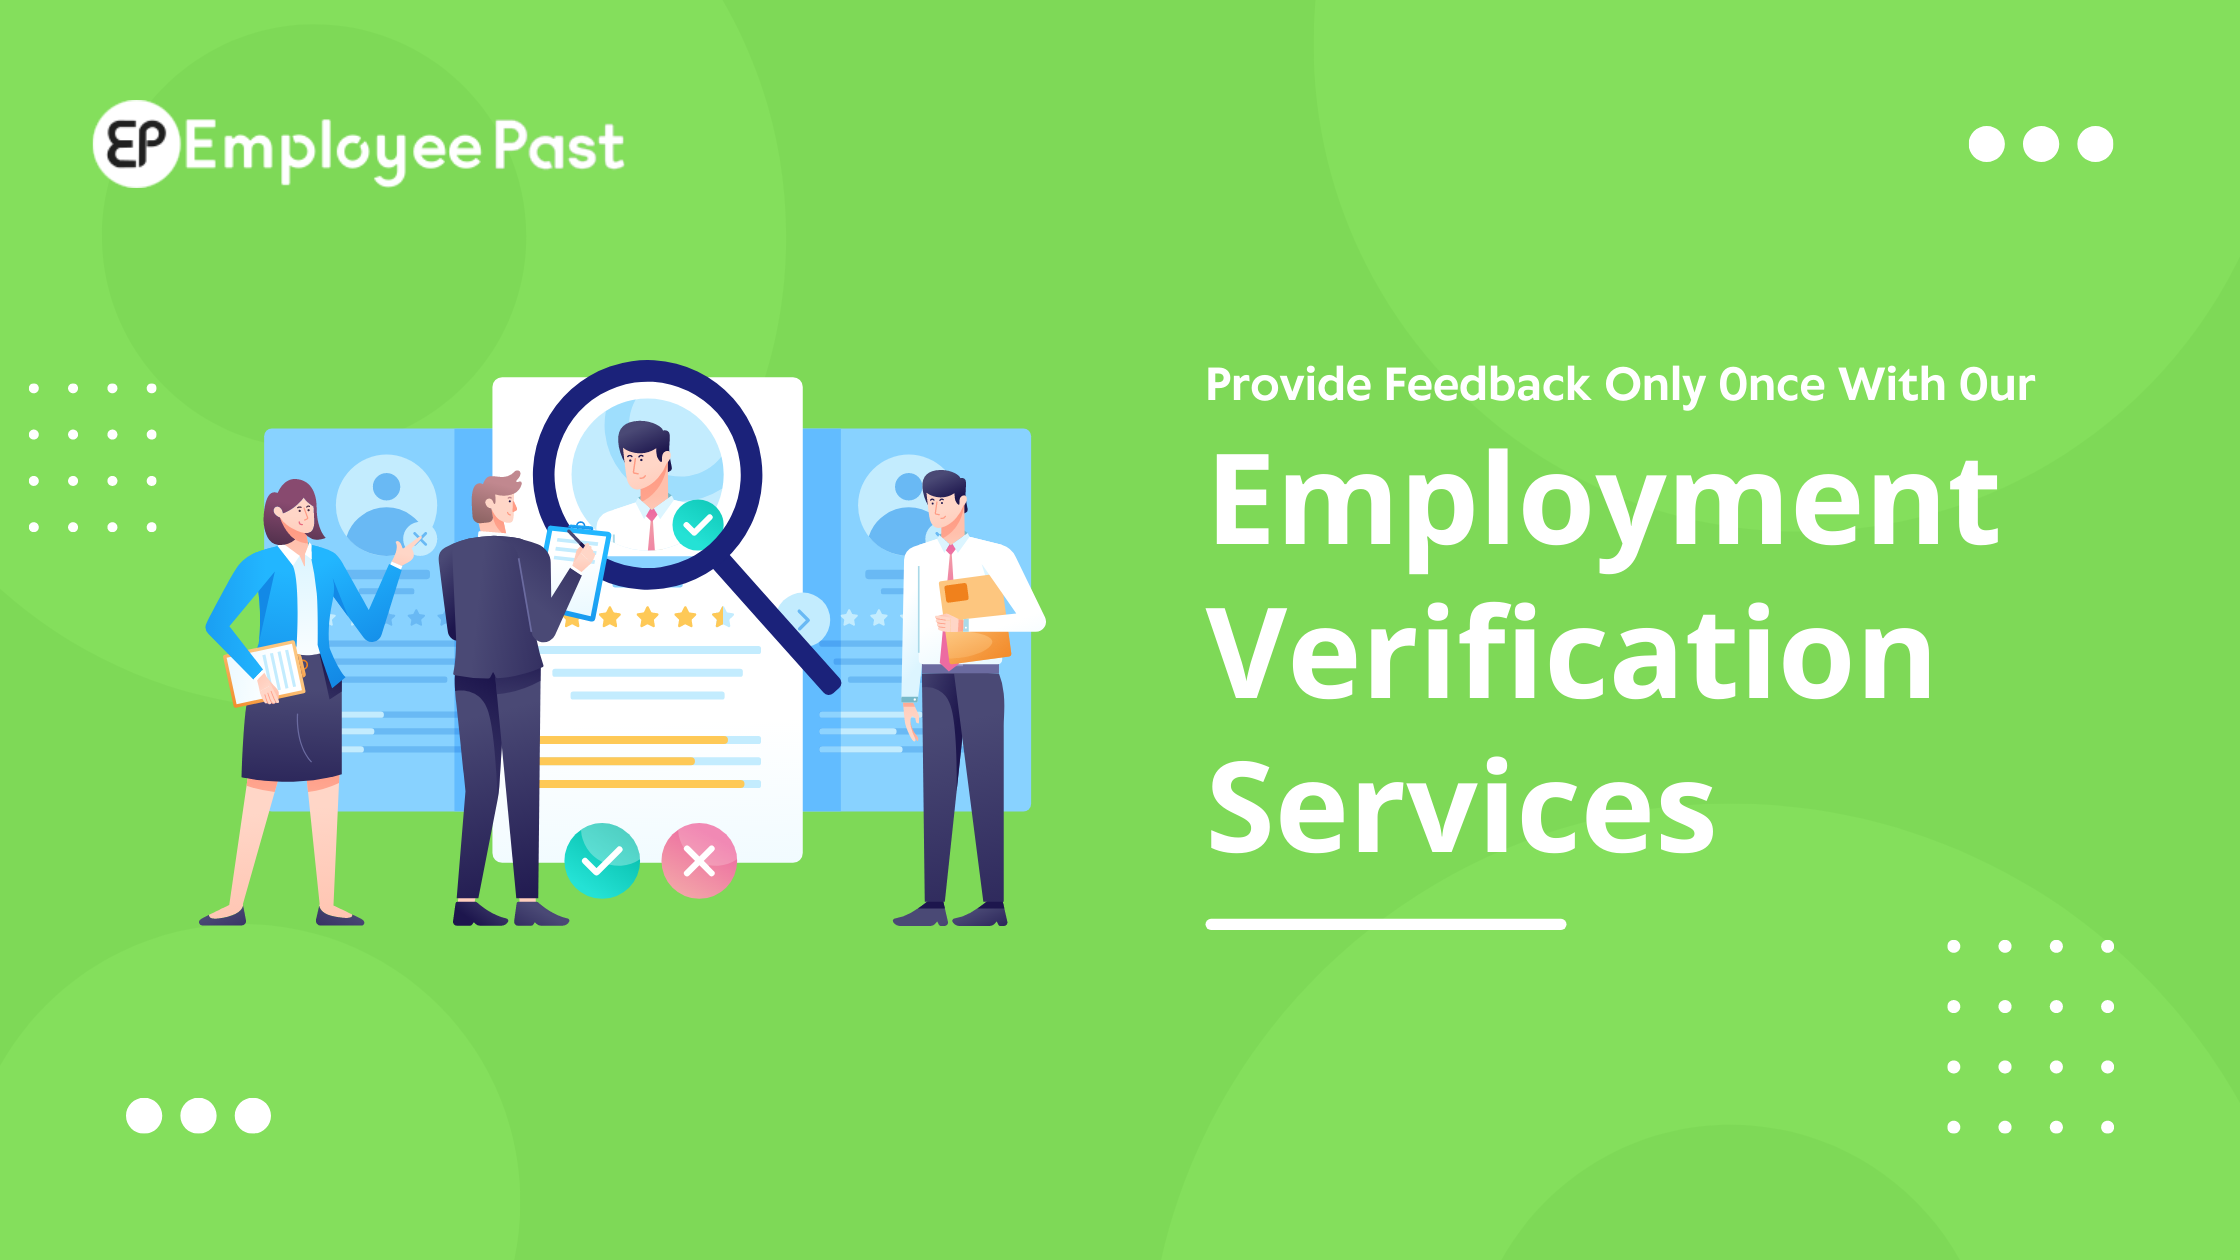 Provide Feedback Only Once With Our Employment Verification Services